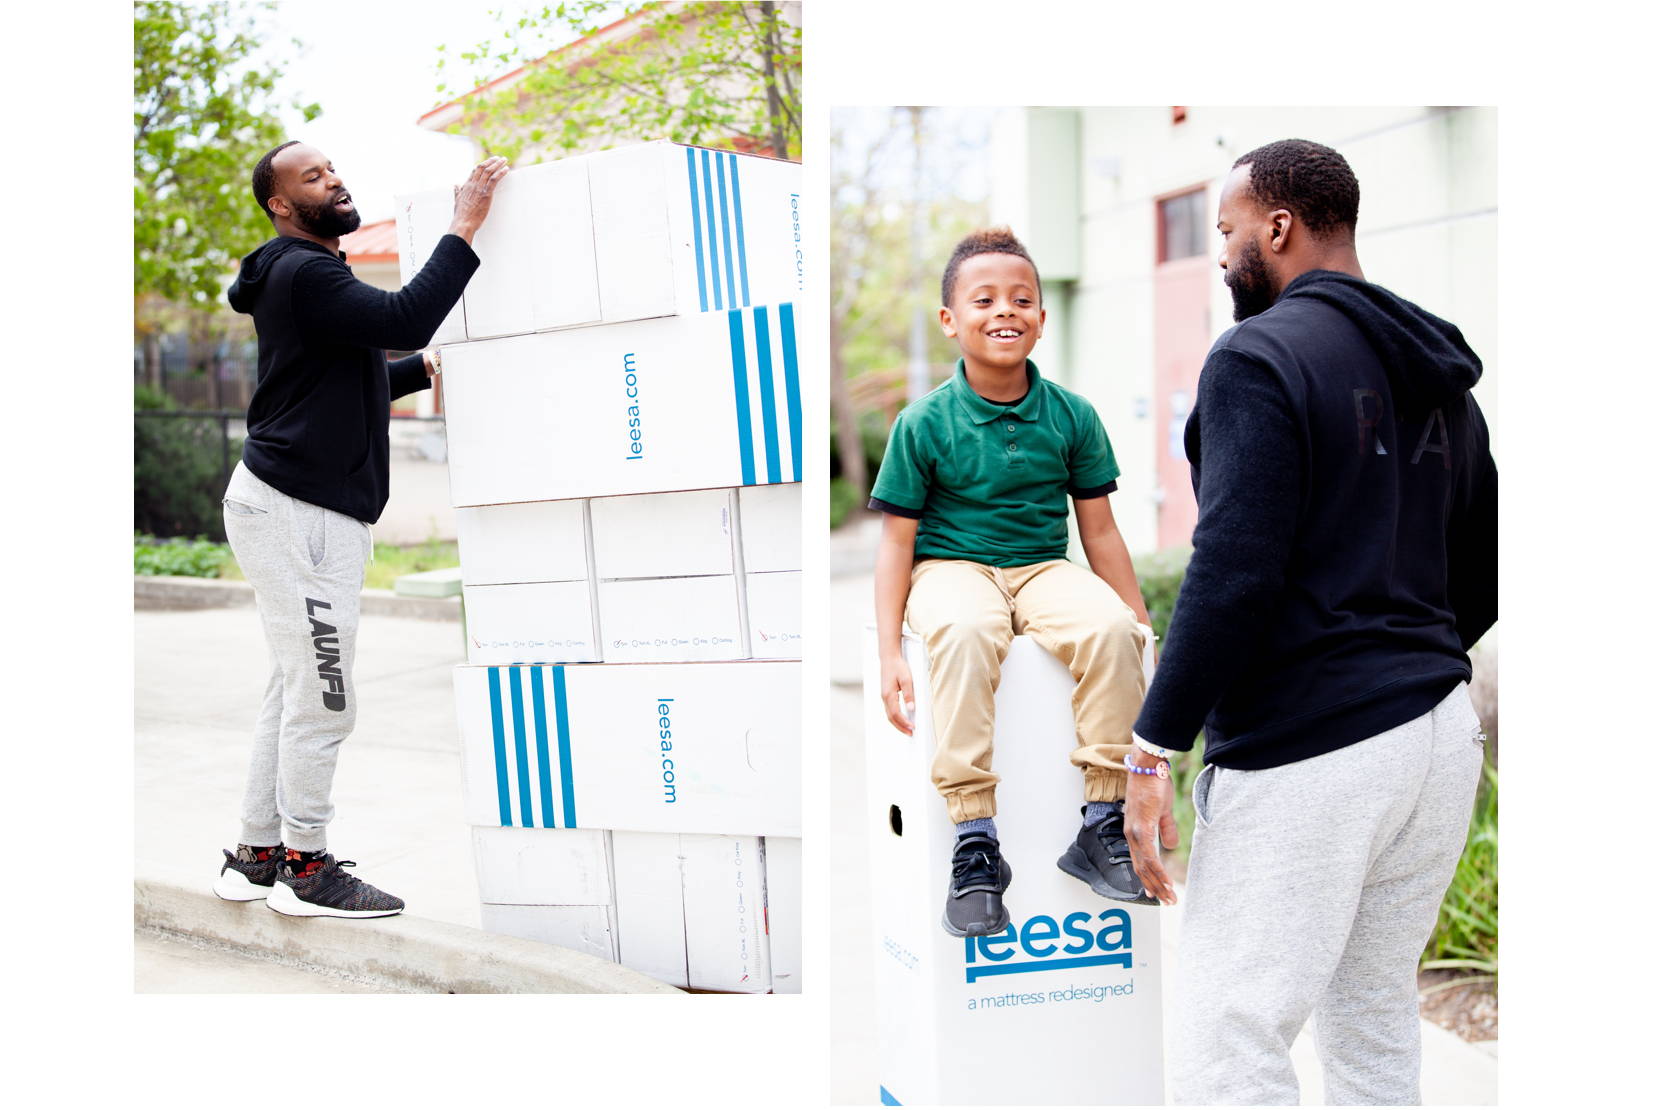 Former NBA player Baron Davis volunteering with Leesa on a mattress delivery for kids in need